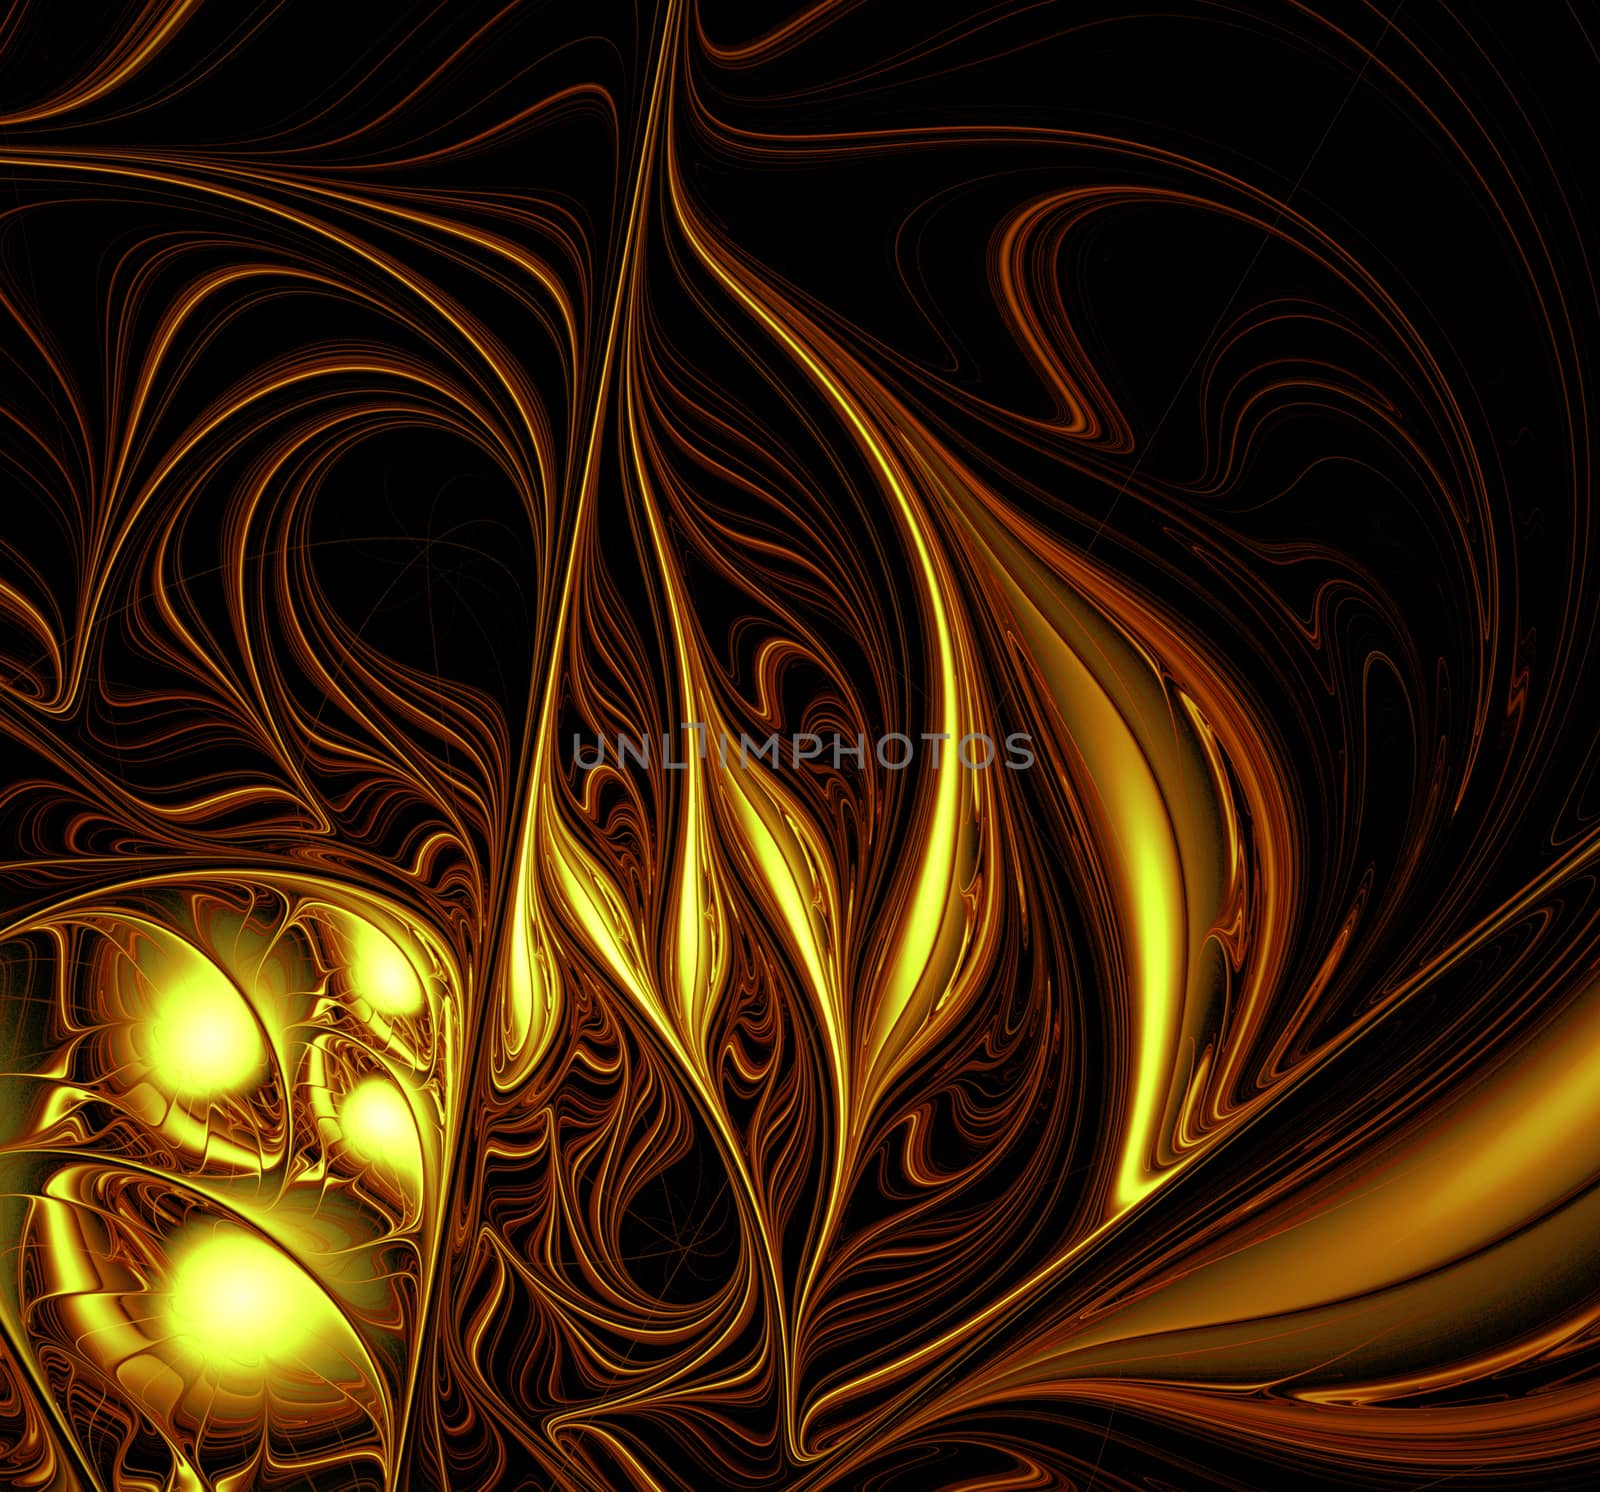 Excellent mysterious glowing gold metallic fractal pattern